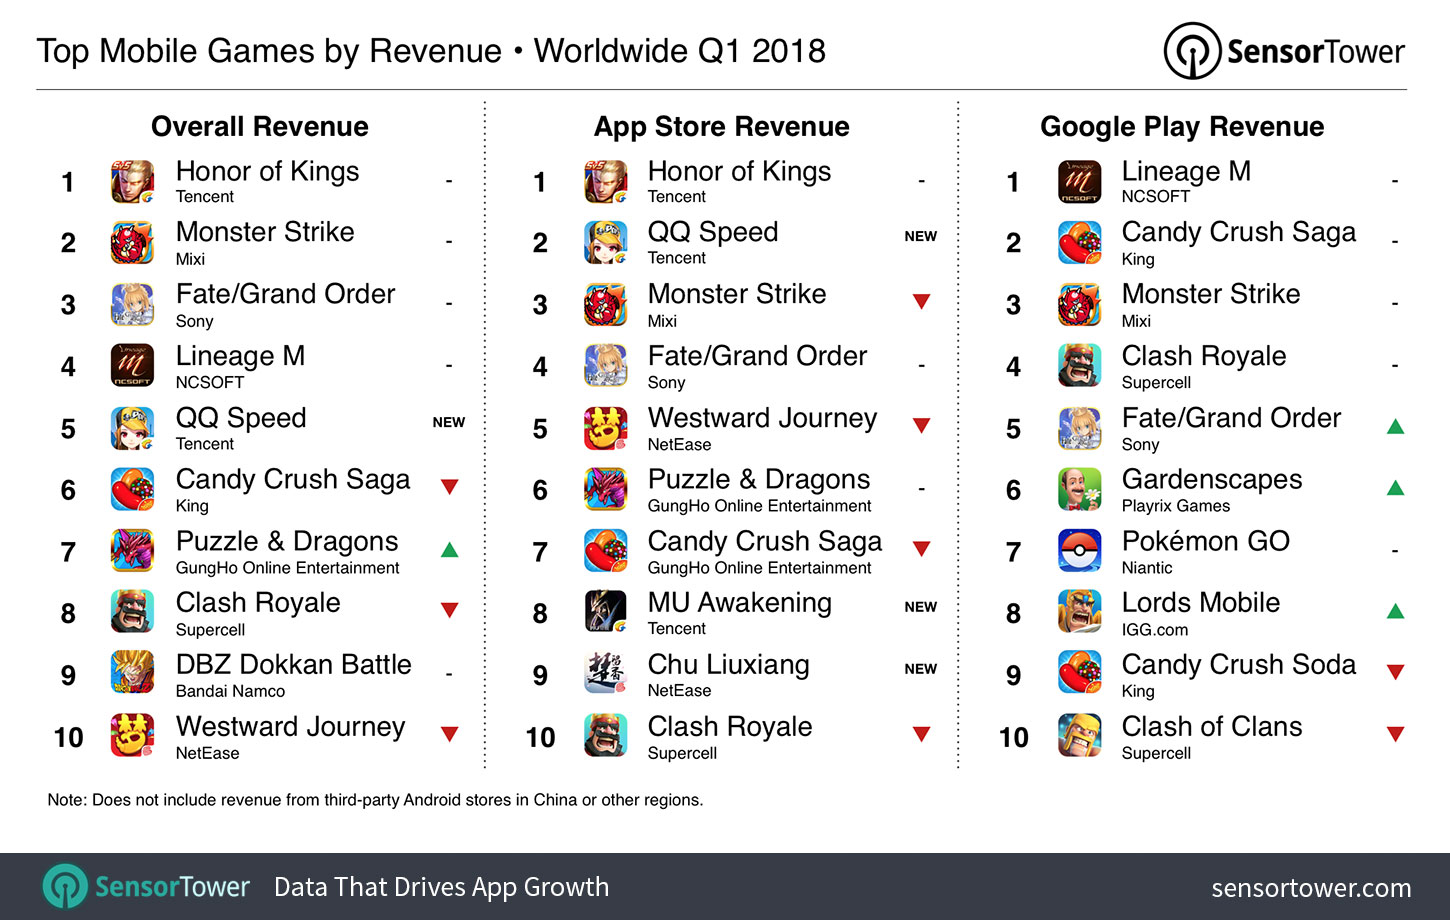 Chart showing the world's highest grossing iOS and Google Play games for Q1 2018